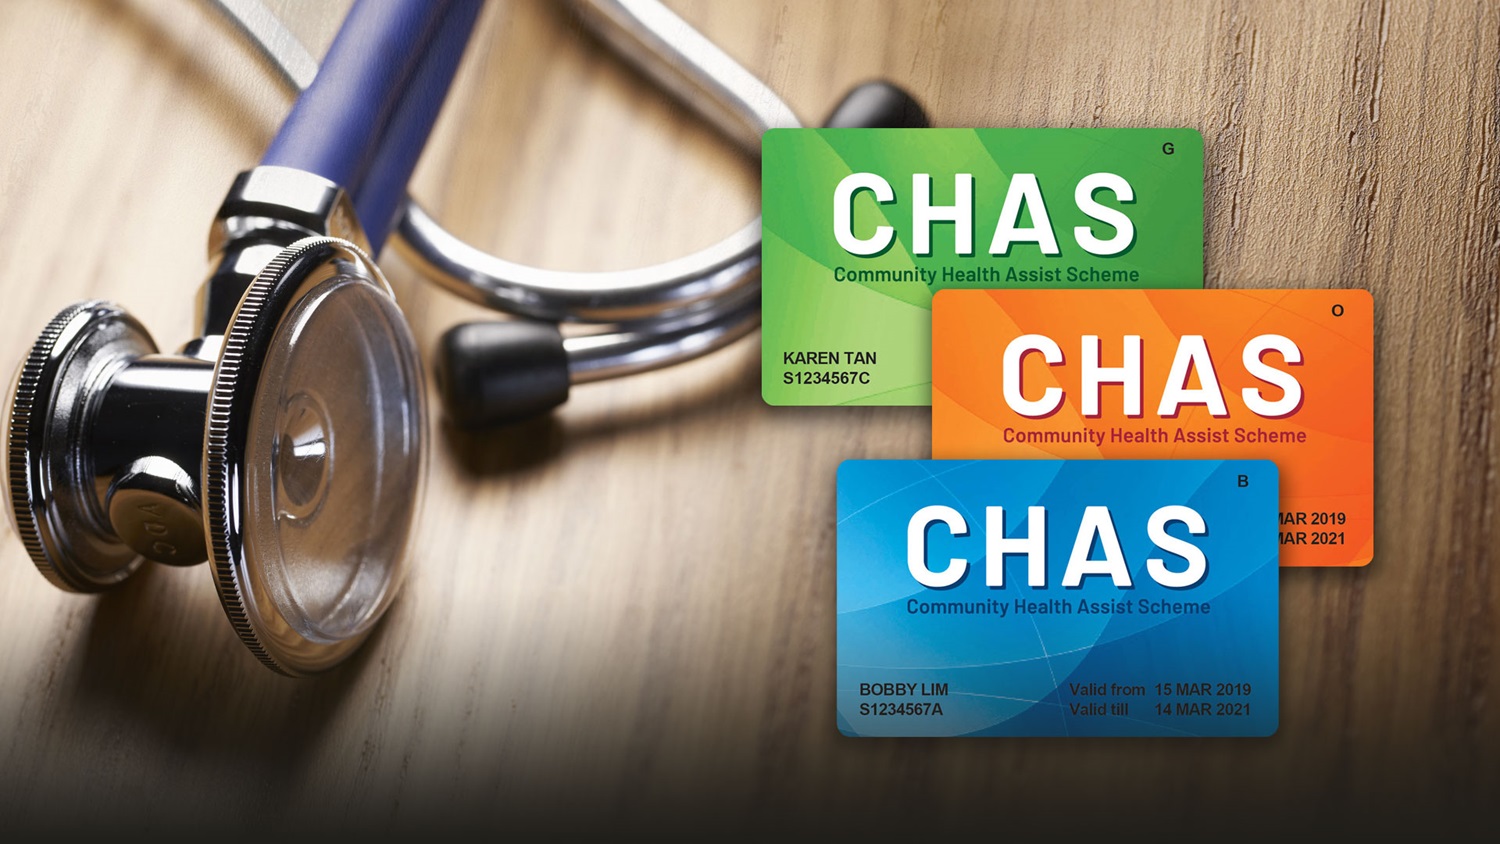 What’s the difference between the 3 types of CHAS cards?